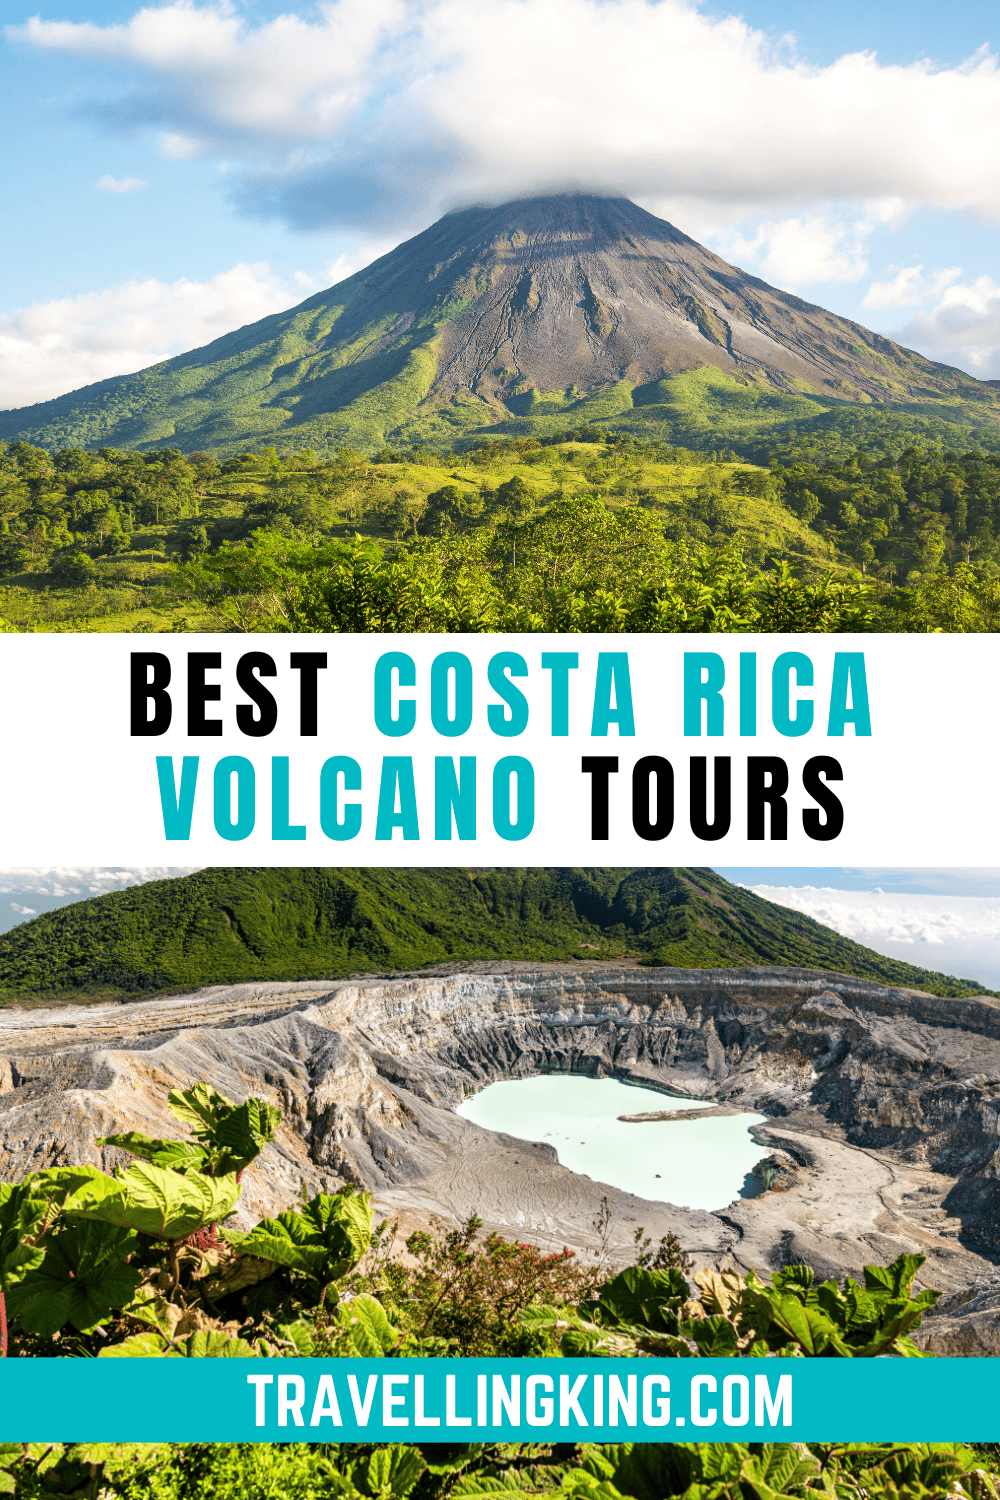 12 Of The Best Costa Rica Volcano Tours